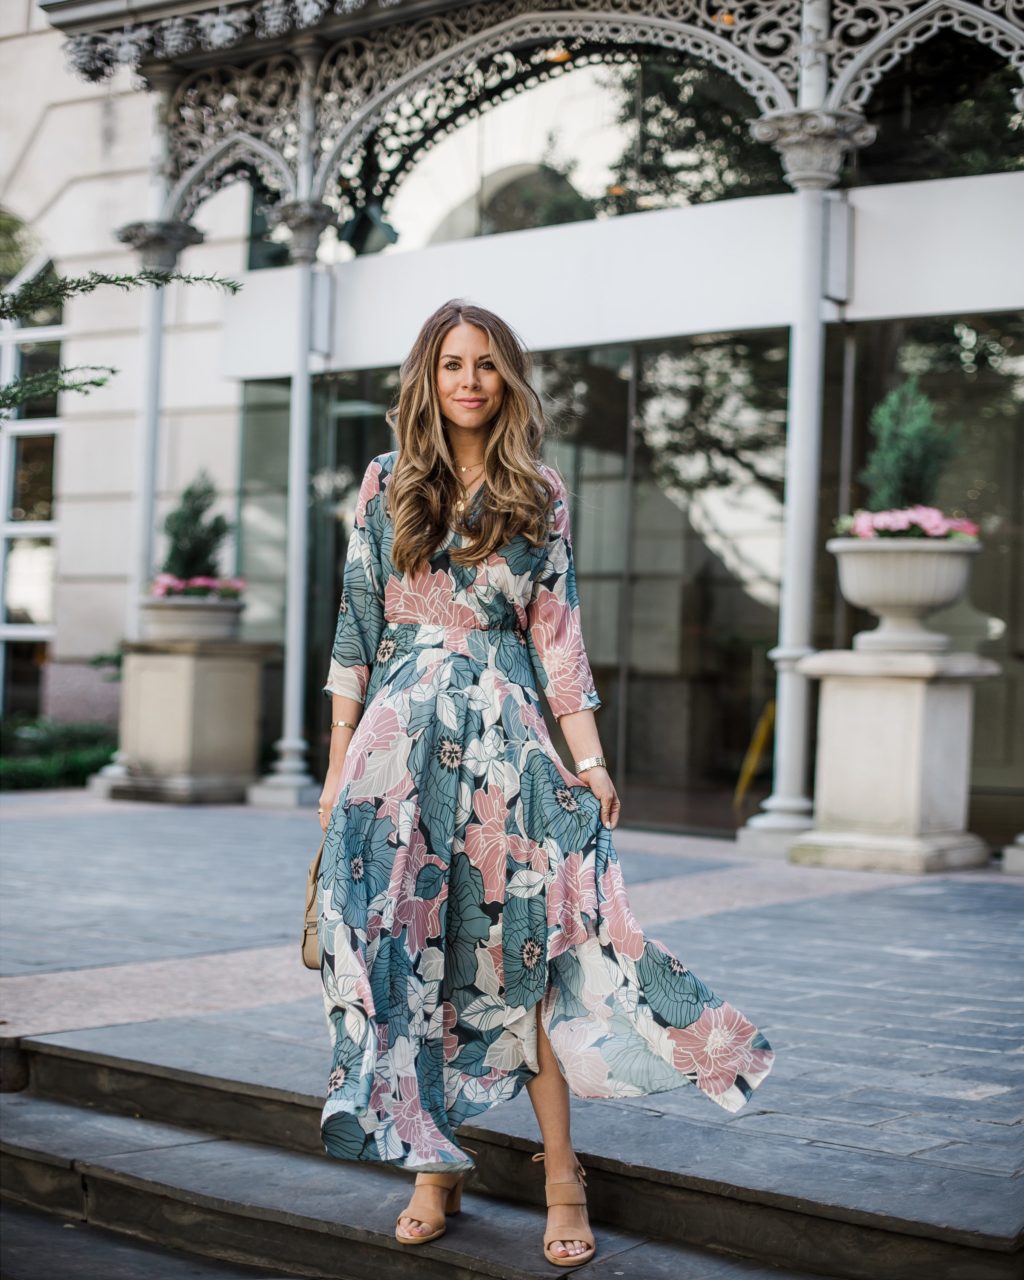 Wearing White To A Wedding After Market Floral Chiffon Maxi Dress